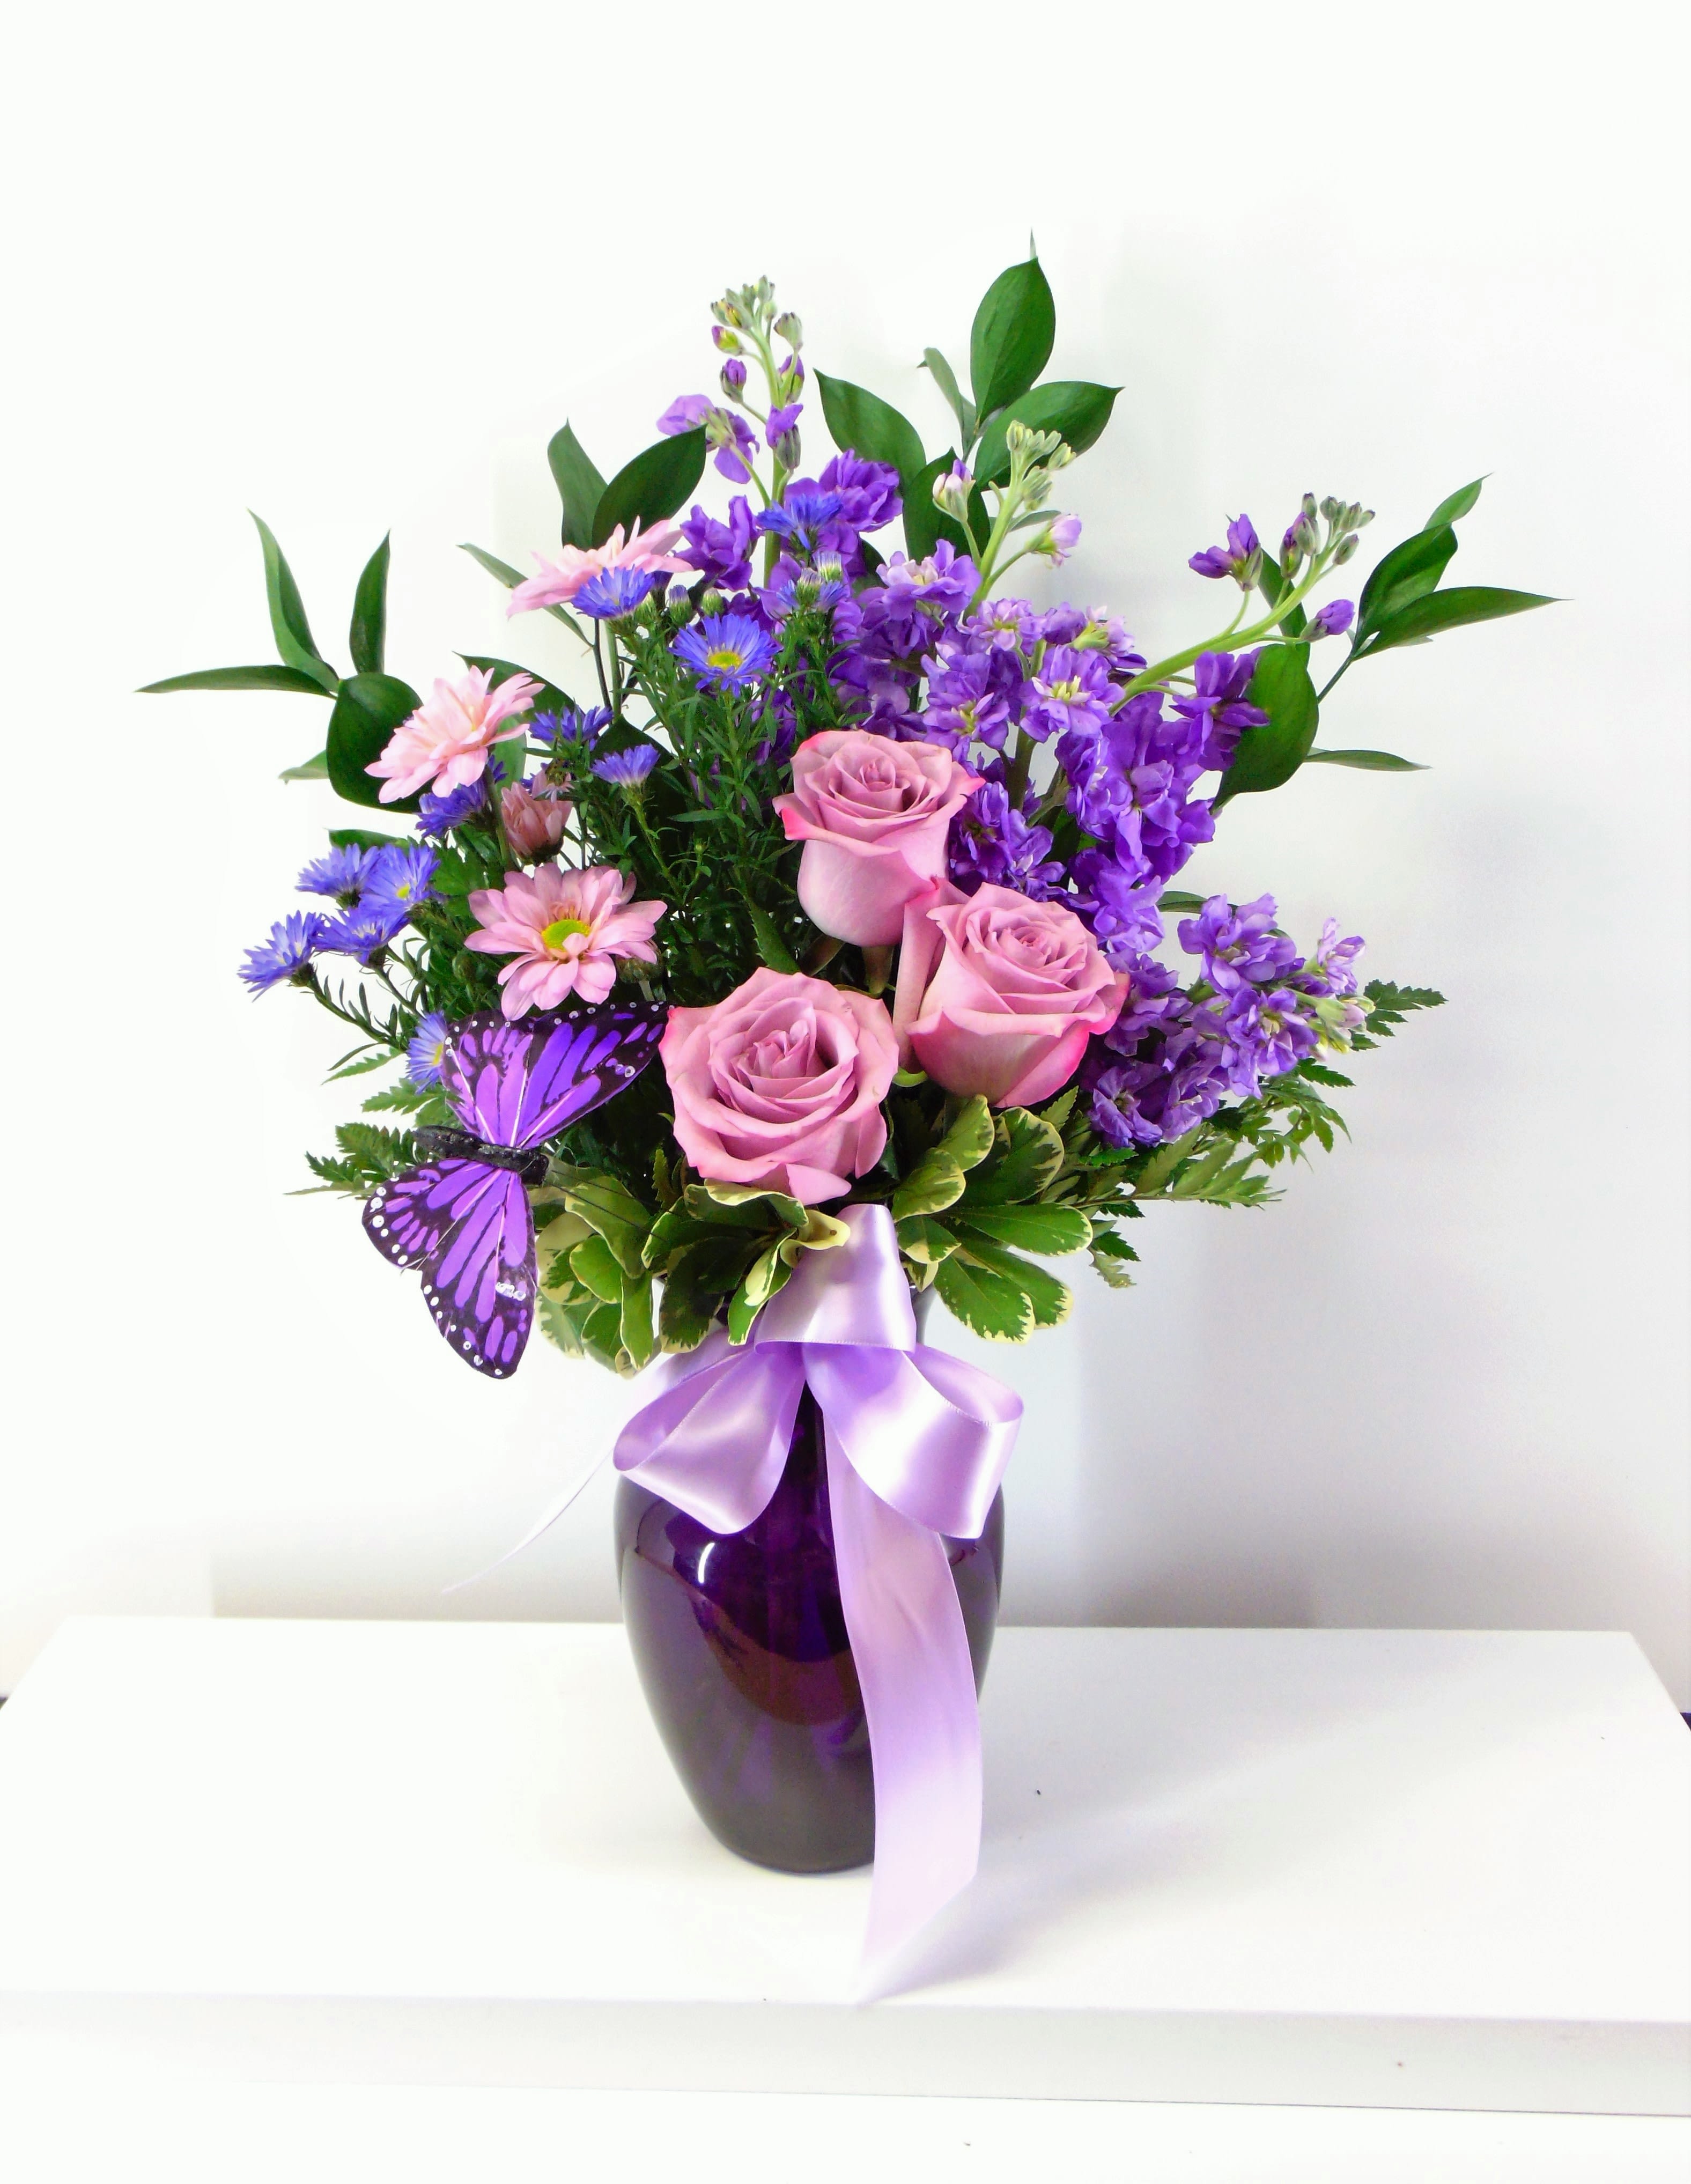 Violet Visions - Purple stock, purple asters, lavender daisies and lavender roses in a purple vase with satin ribbon purple butterfly. The standard option is pictured.  The deluxe option adds 3 more stems. The premium option is larger and includes 6 more stems of flowers.  All sizes include the satin bow and butterfly.